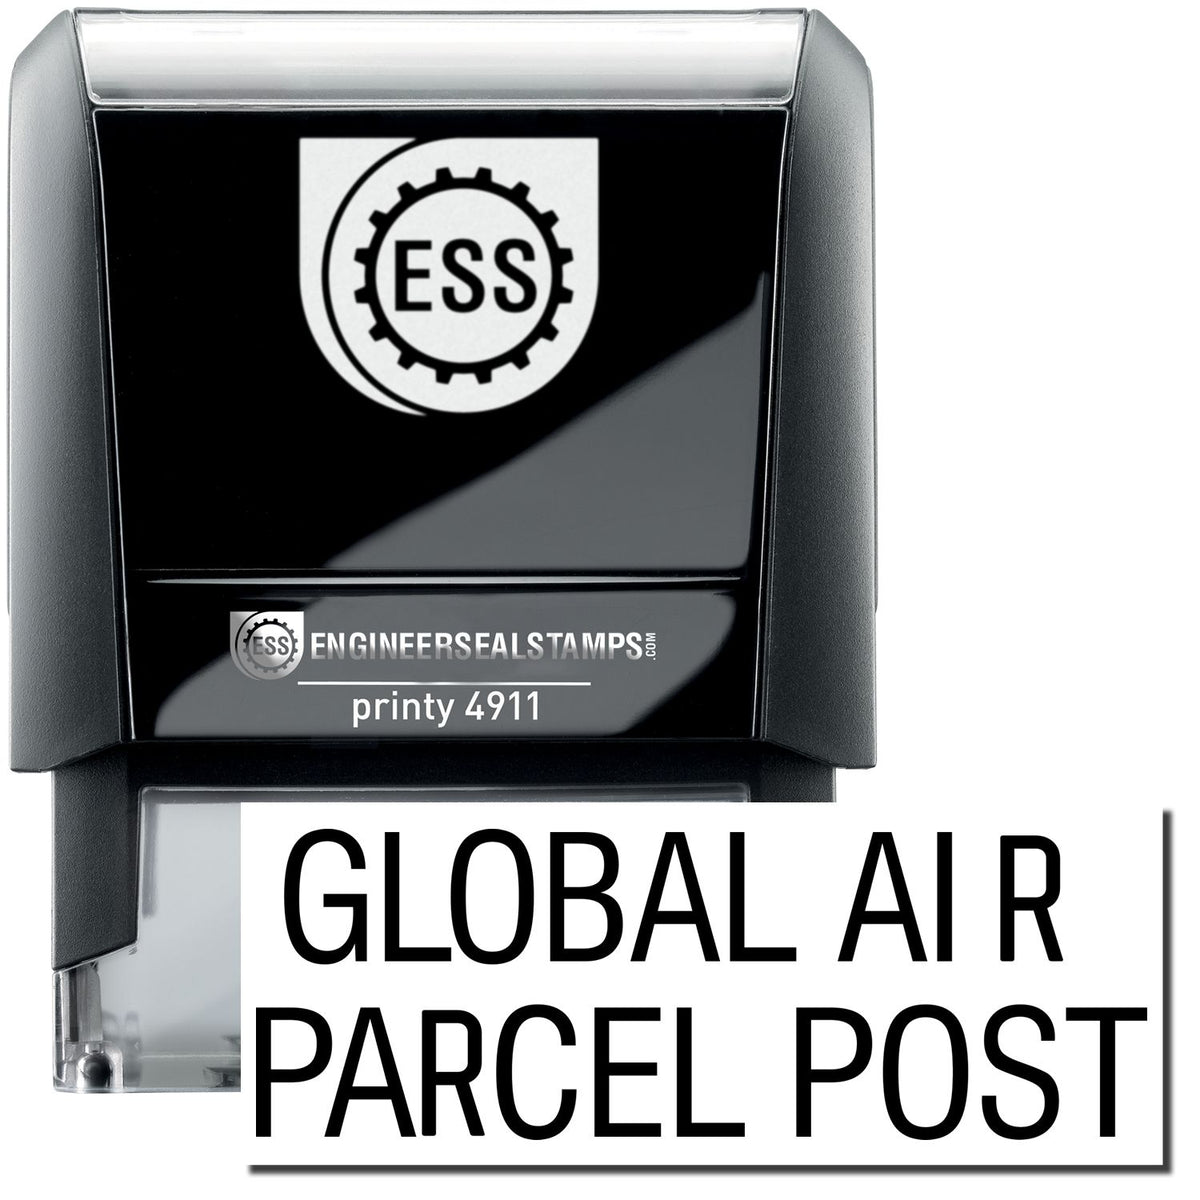 A self-inking stamp with a stamped image showing how the text &quot;GLOBAL AIR PARCEL POST&quot; is displayed after stamping.